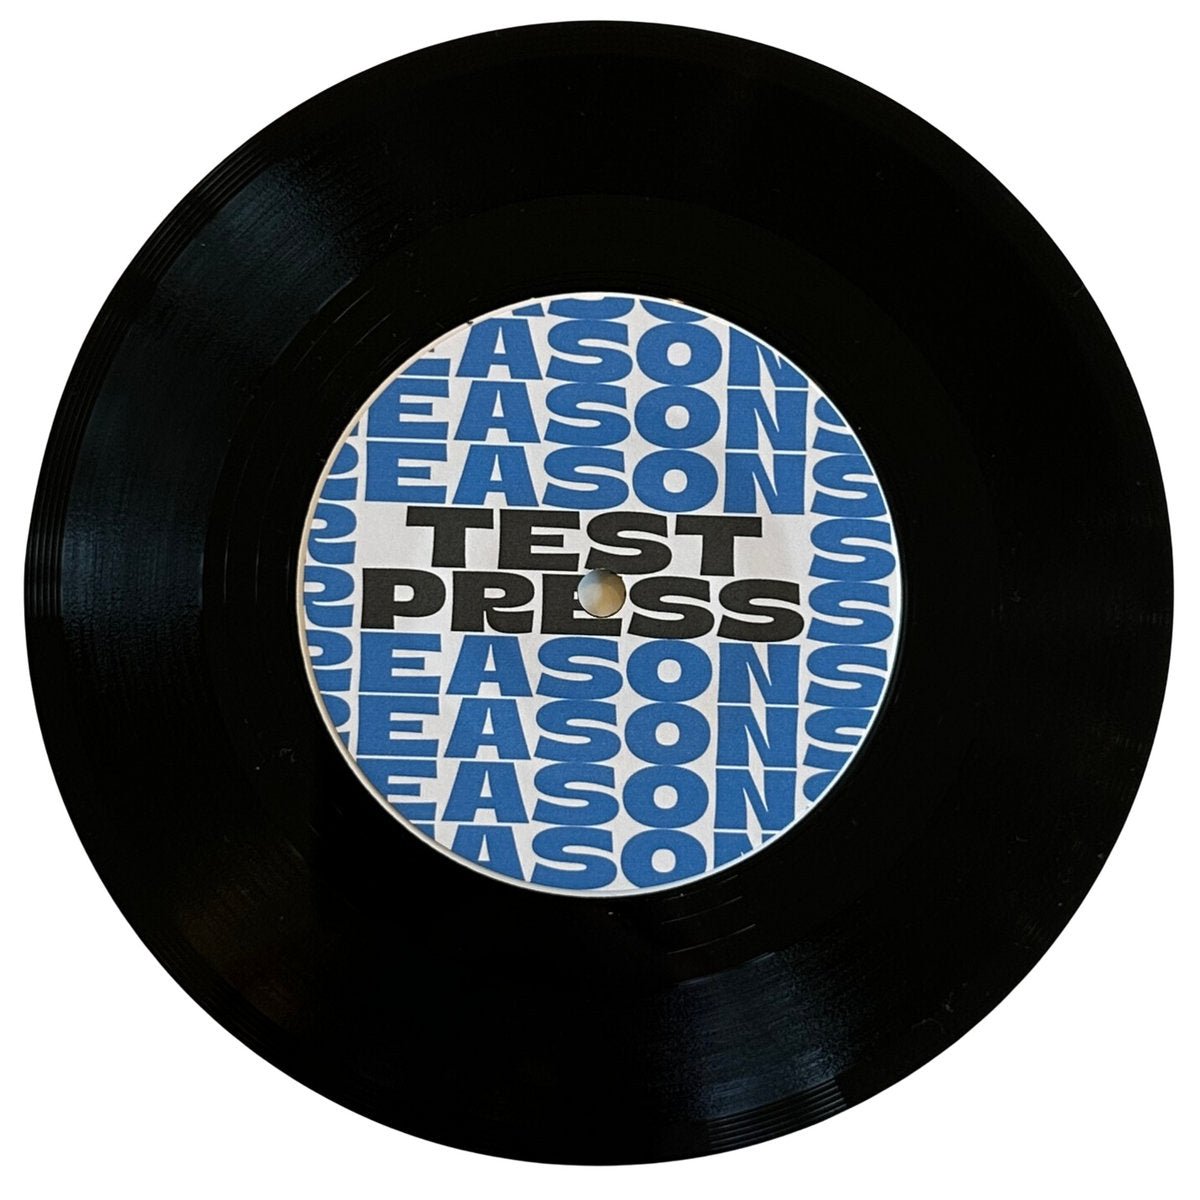 Akshin Alizadeh - Reasons - Limited Edition 7 Inch Vinyl Test Pressing - Cold Busted